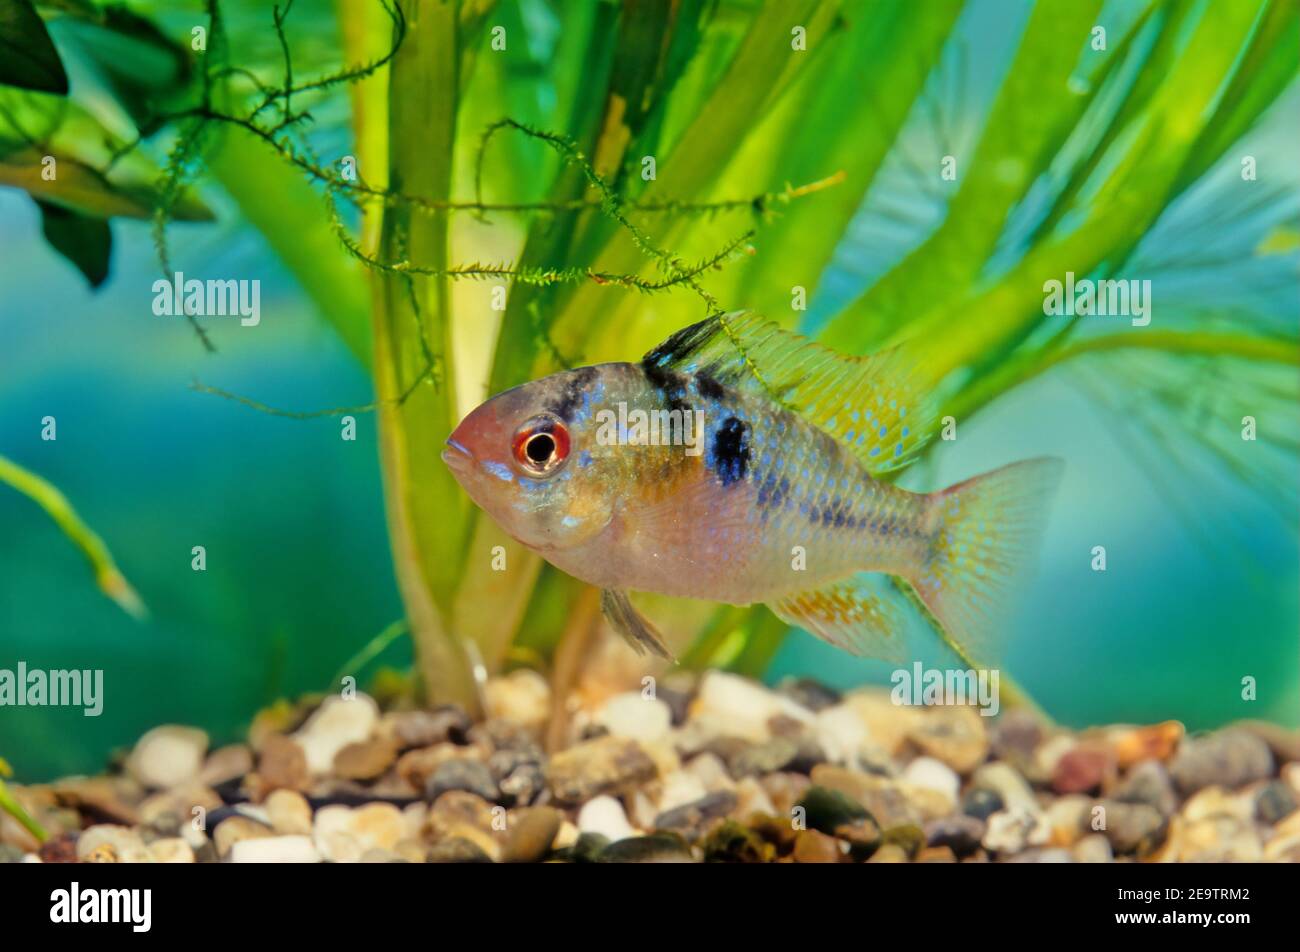 The blue ram, Mikrogeophagus ramirezi, is a species of freshwater fish endemic to the Orinoco River basin, in the savannahs of Venezuela and Colombia Stock Photo